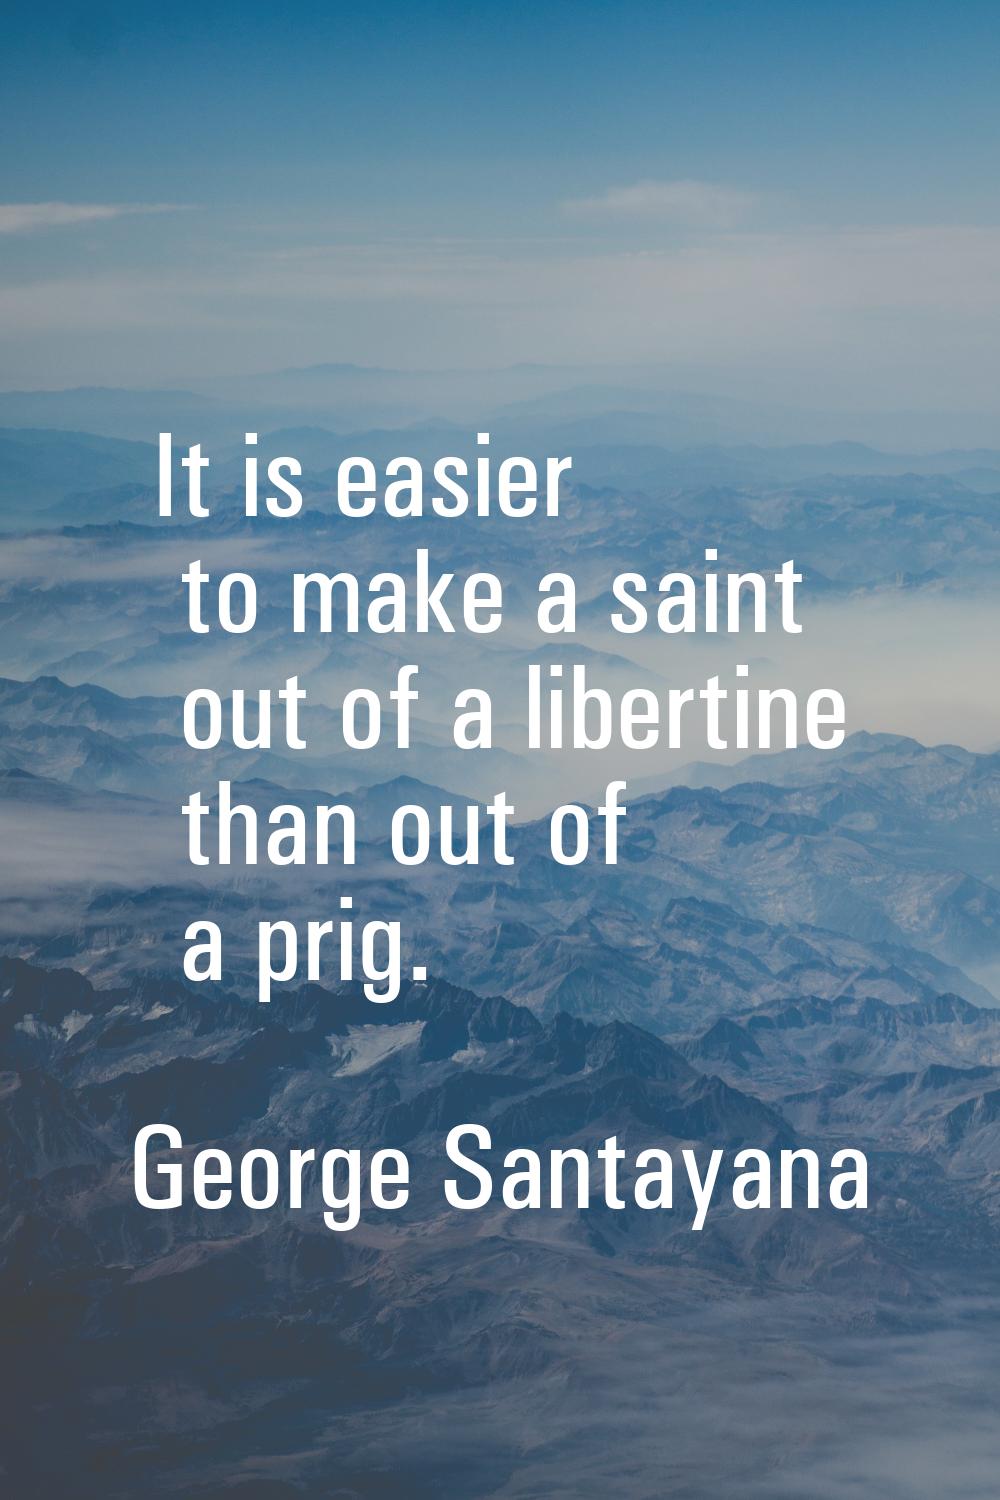 It is easier to make a saint out of a libertine than out of a prig.